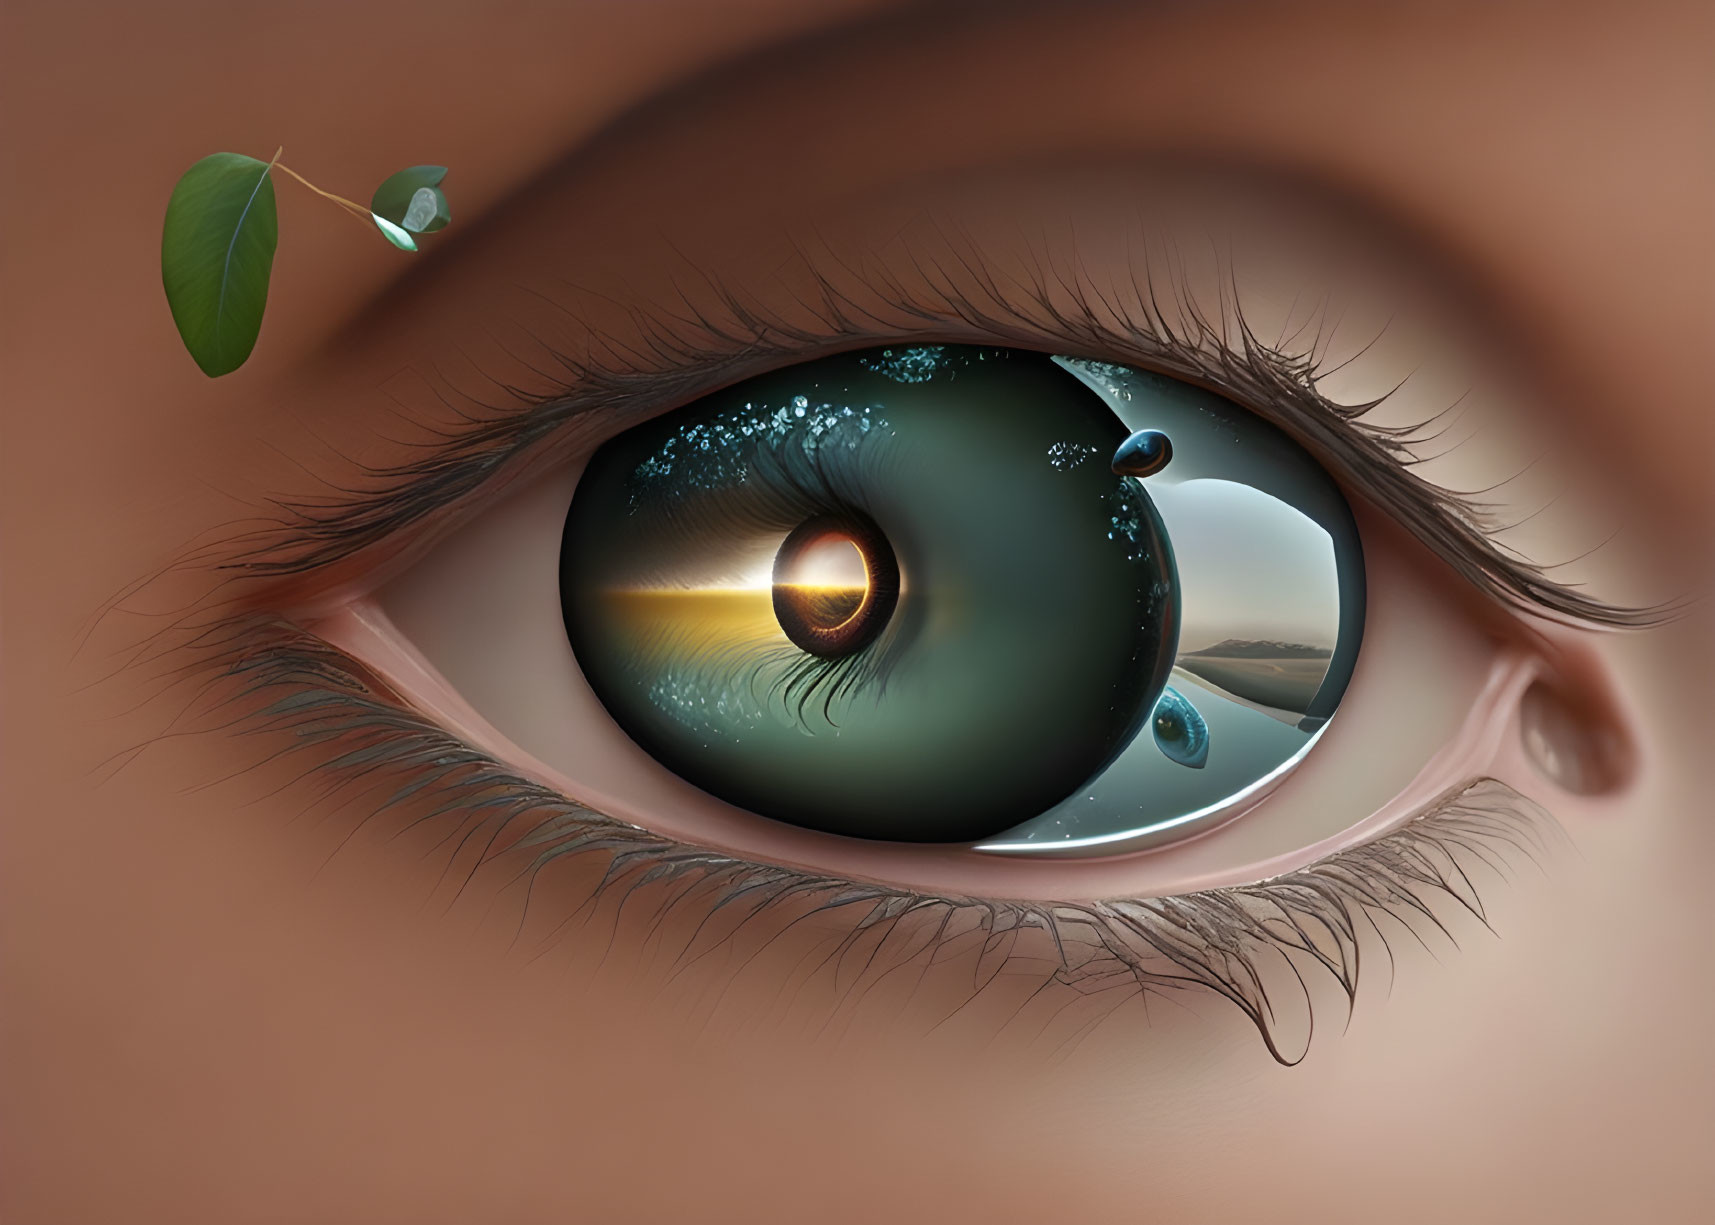 Surreal eye image with scenic reflection and nature elements